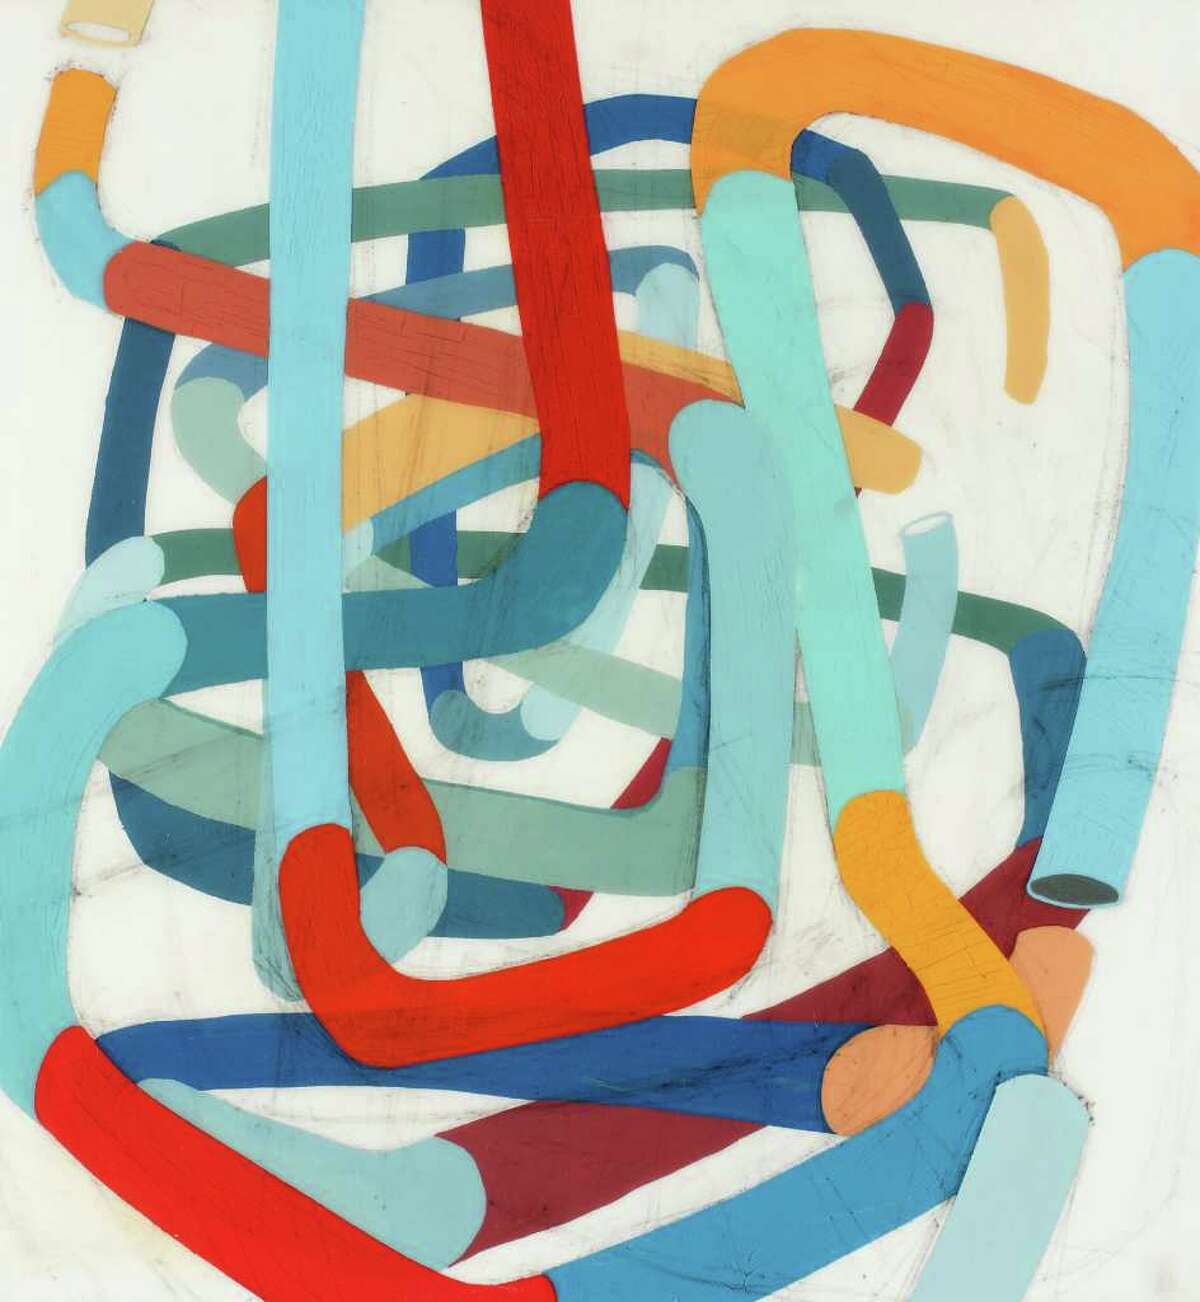 ?Well Out? by Kathleen Thum (acrylic and graphite on paper on panel) is among the works on display in ?Flux? at the Arts Center of the Capital Region, Troy, through April 1.